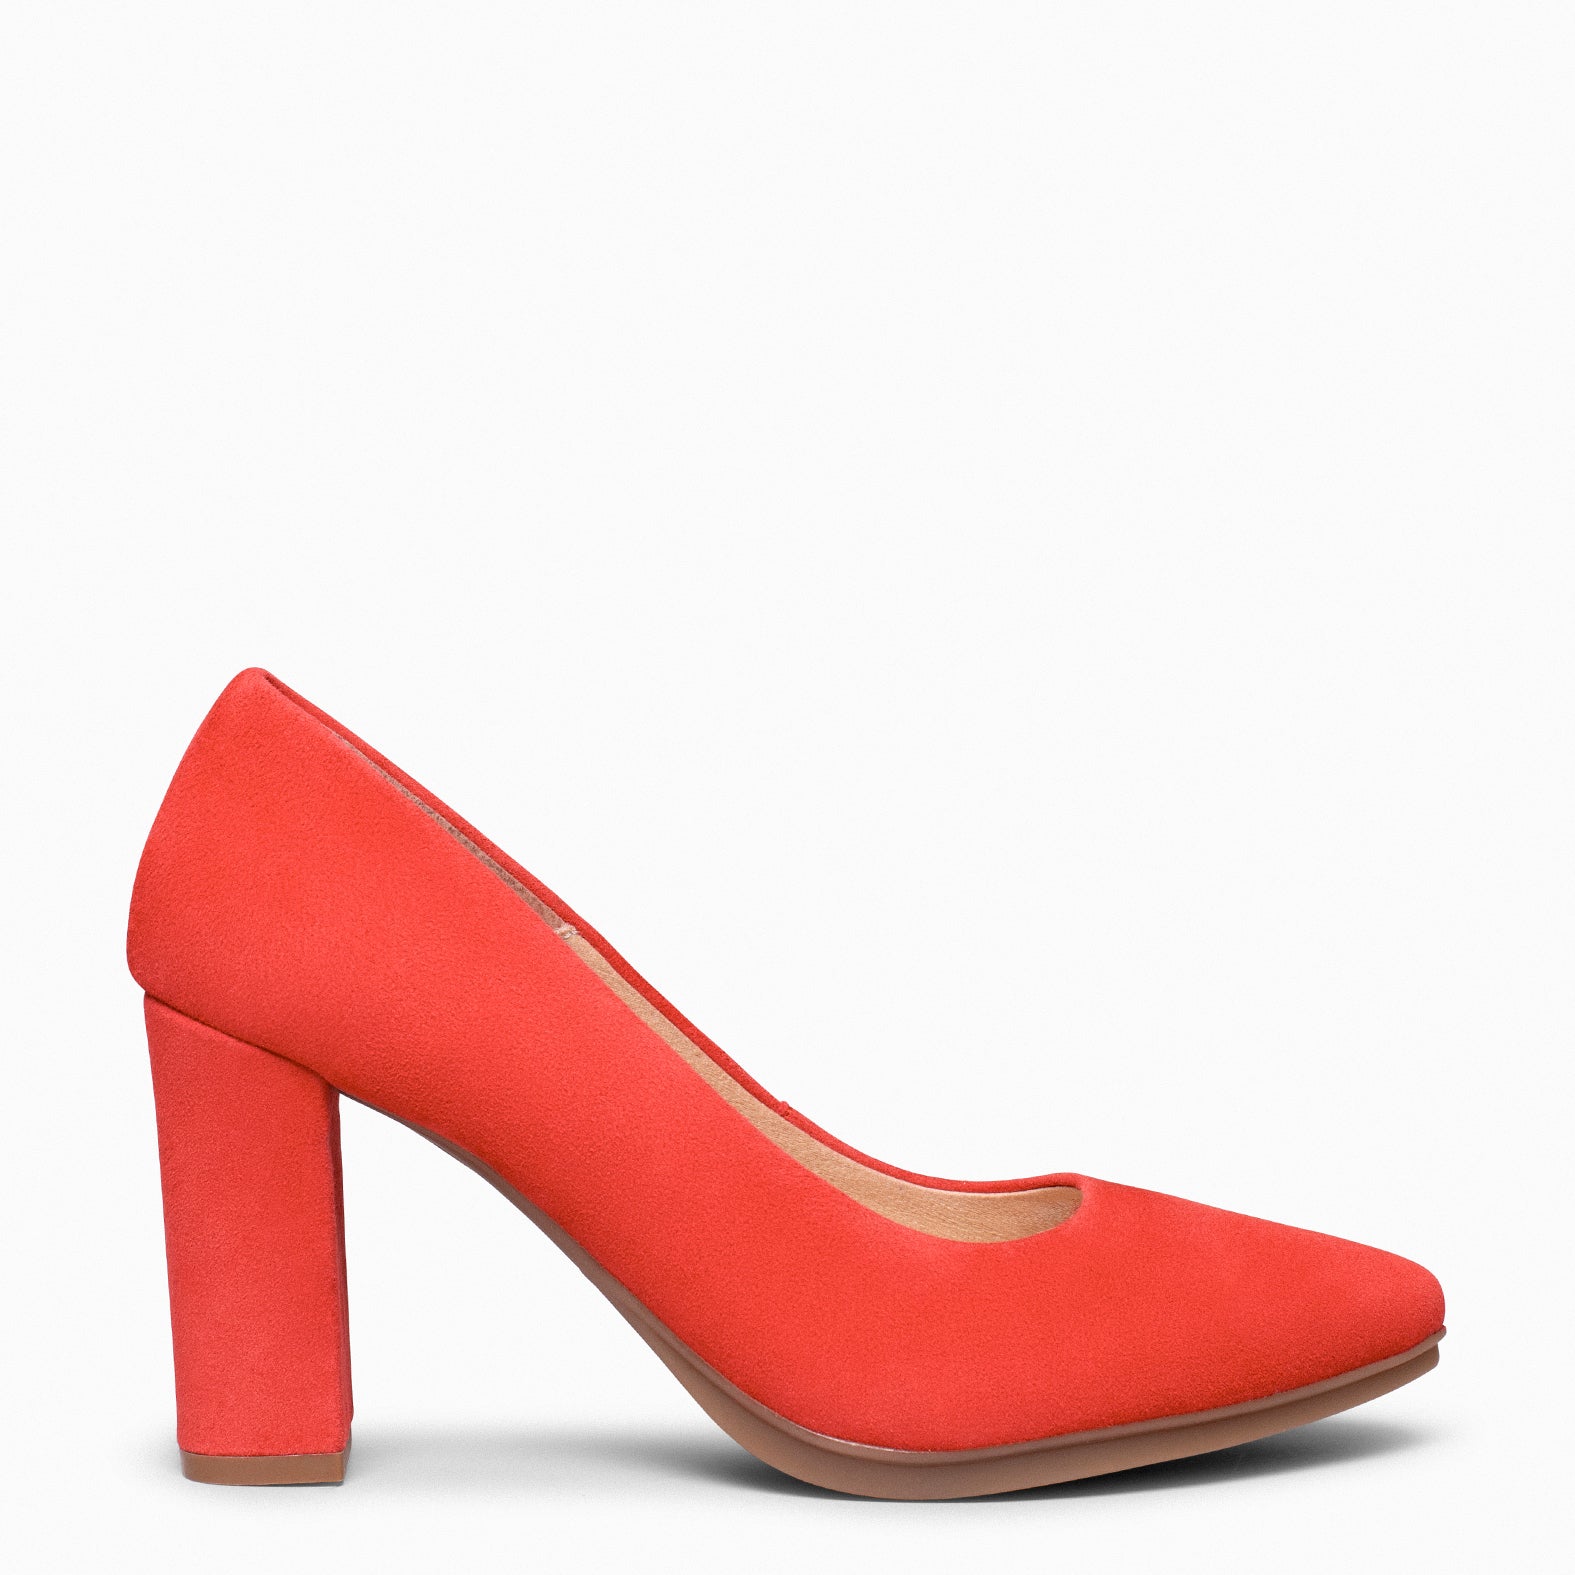 URBAN – FIRE Suede high-heeled shoes 